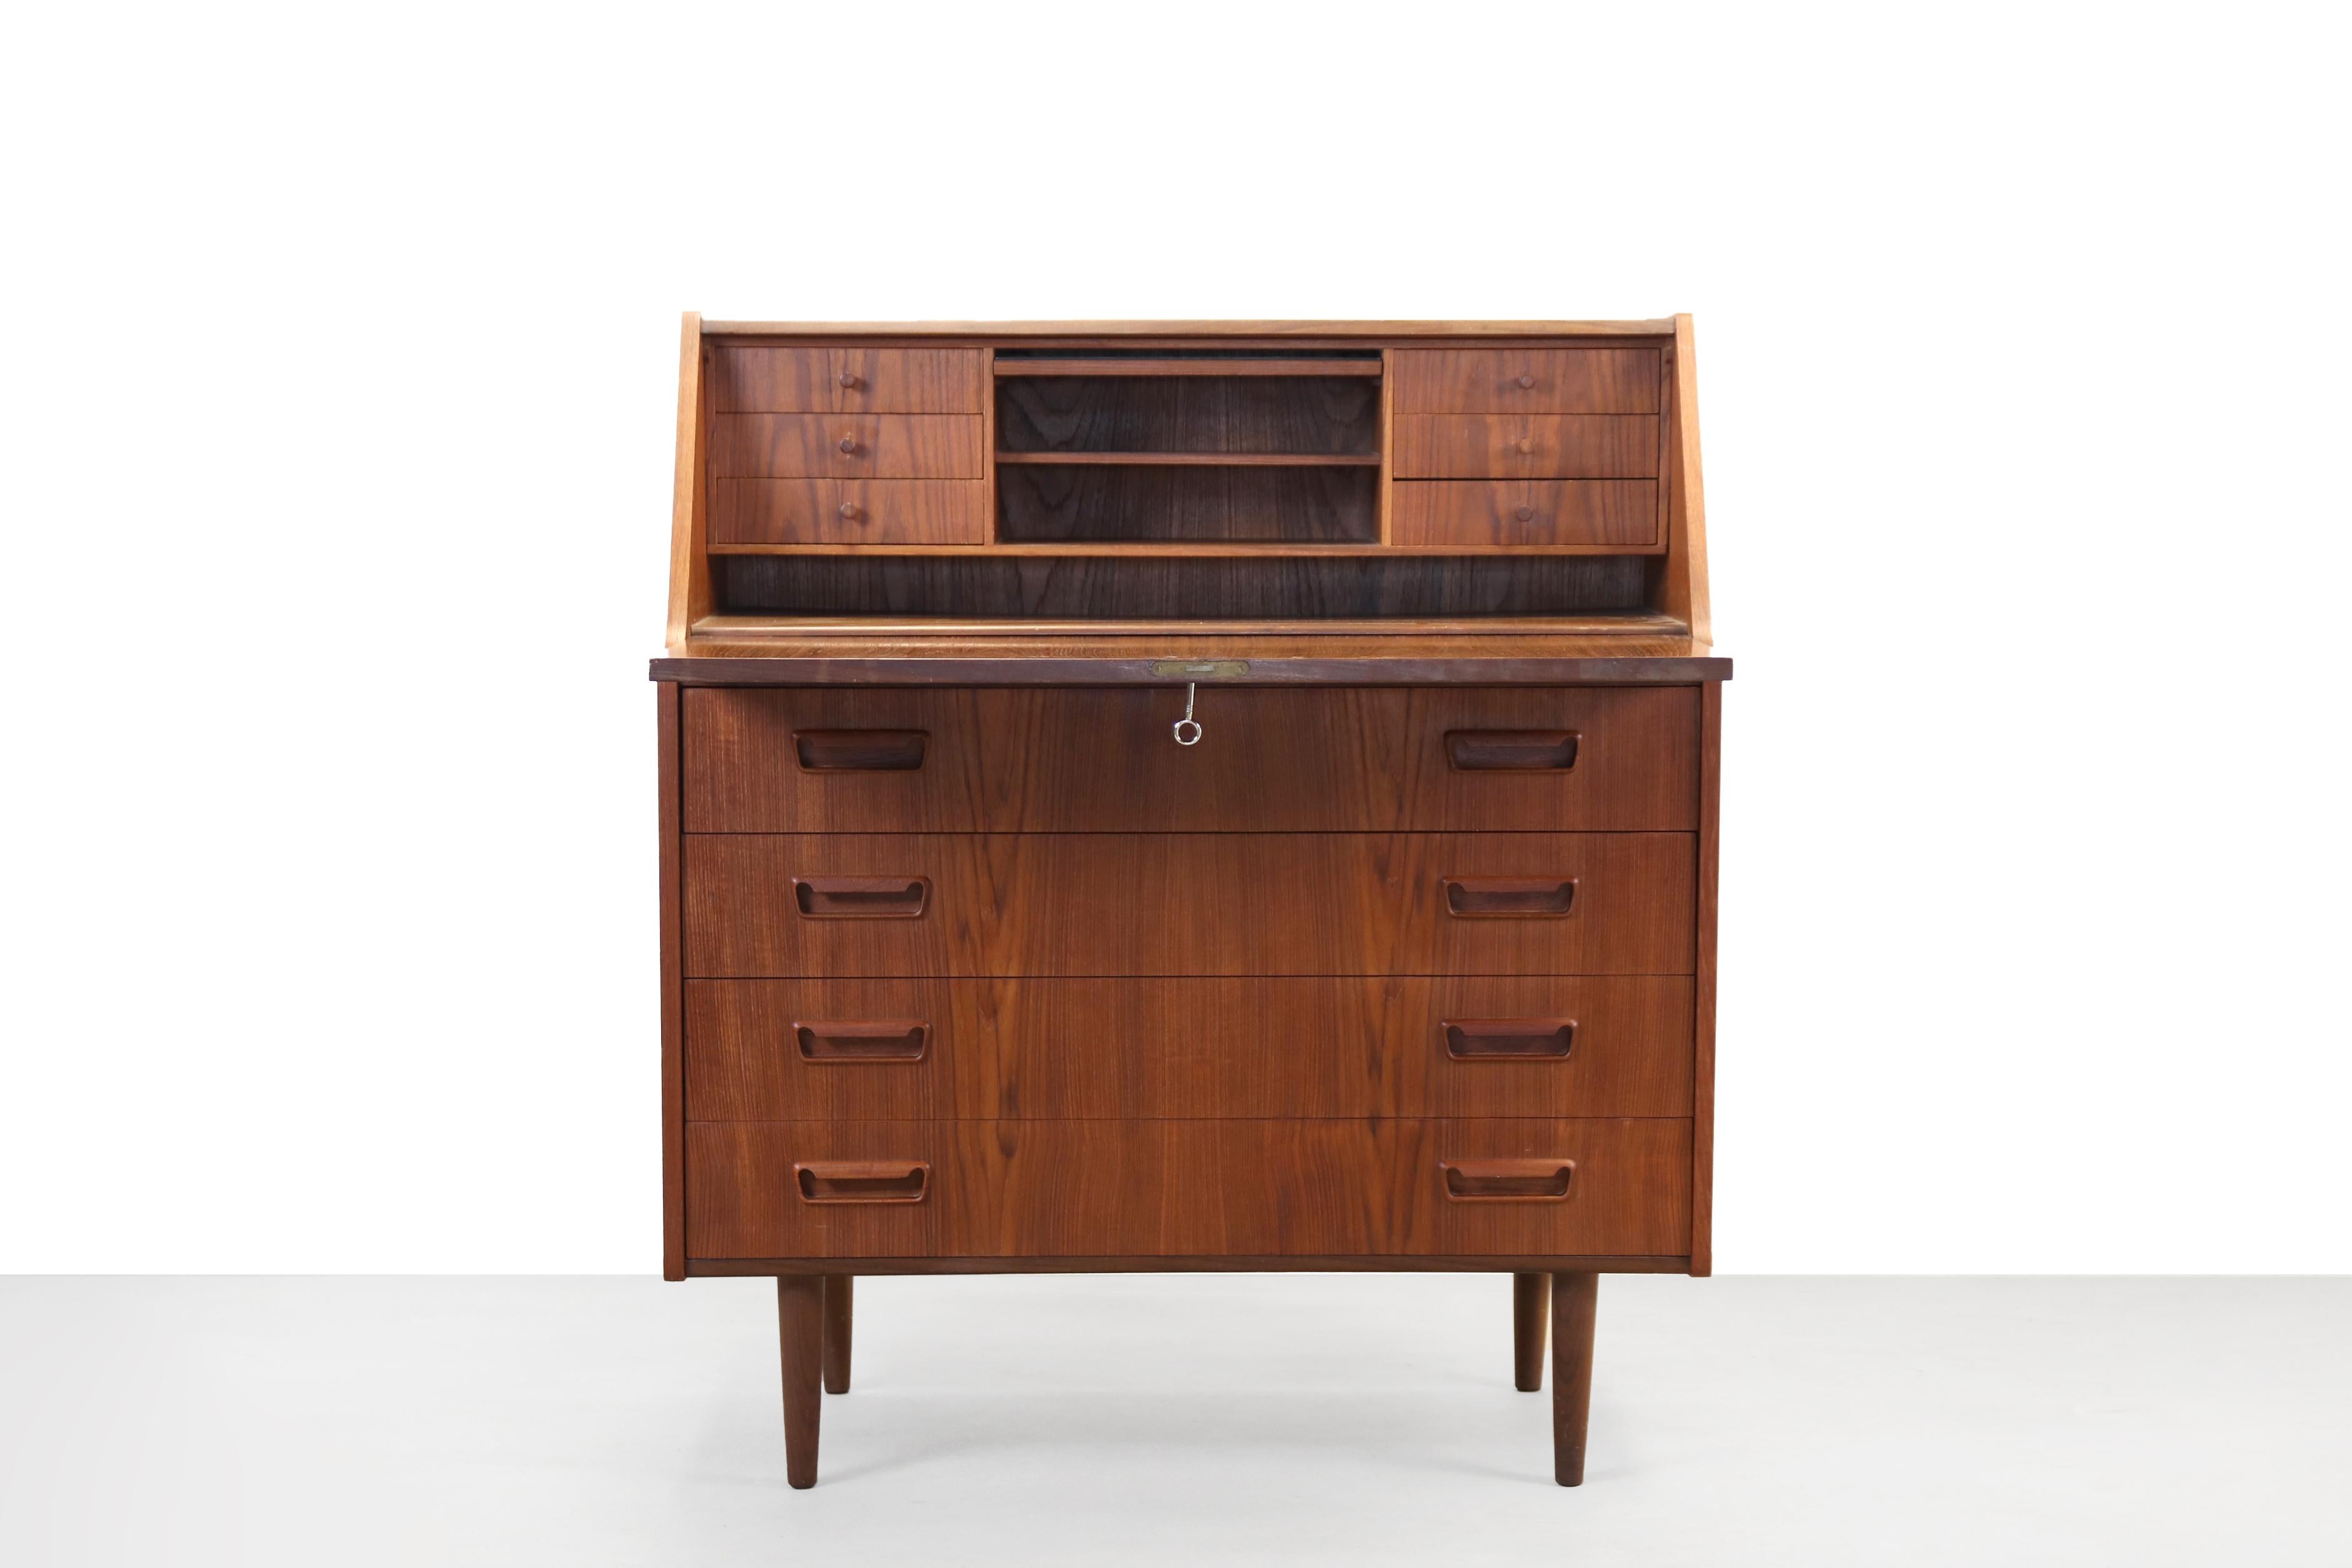 Beautiful secretary desk designed by Gunnar Nielsen Tibergaard and produced by Tibergaard Denmark in the 1960s in Denmark. The lid of the desk is also the desktop when it is folded open. Several storage compartments and drawers can be found behind